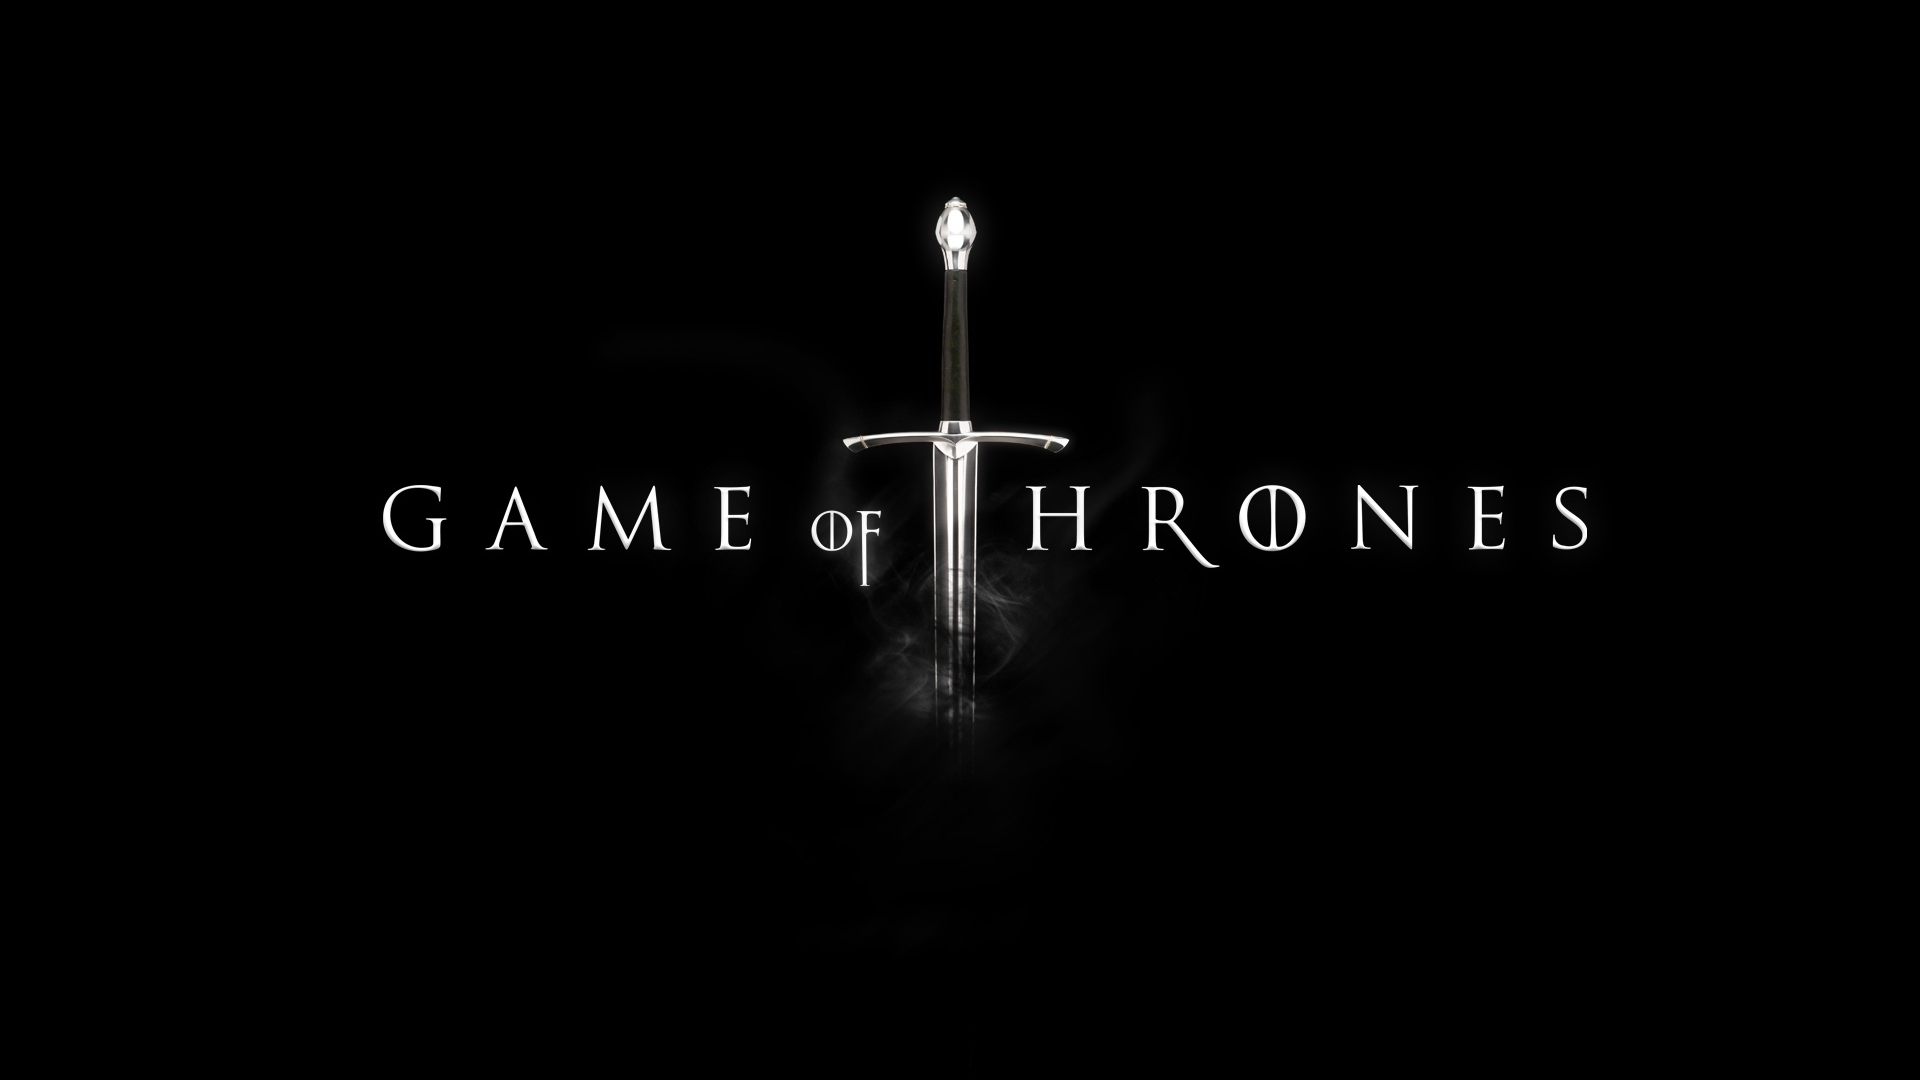 a song of ice and fire, game of thrones, игра престолов